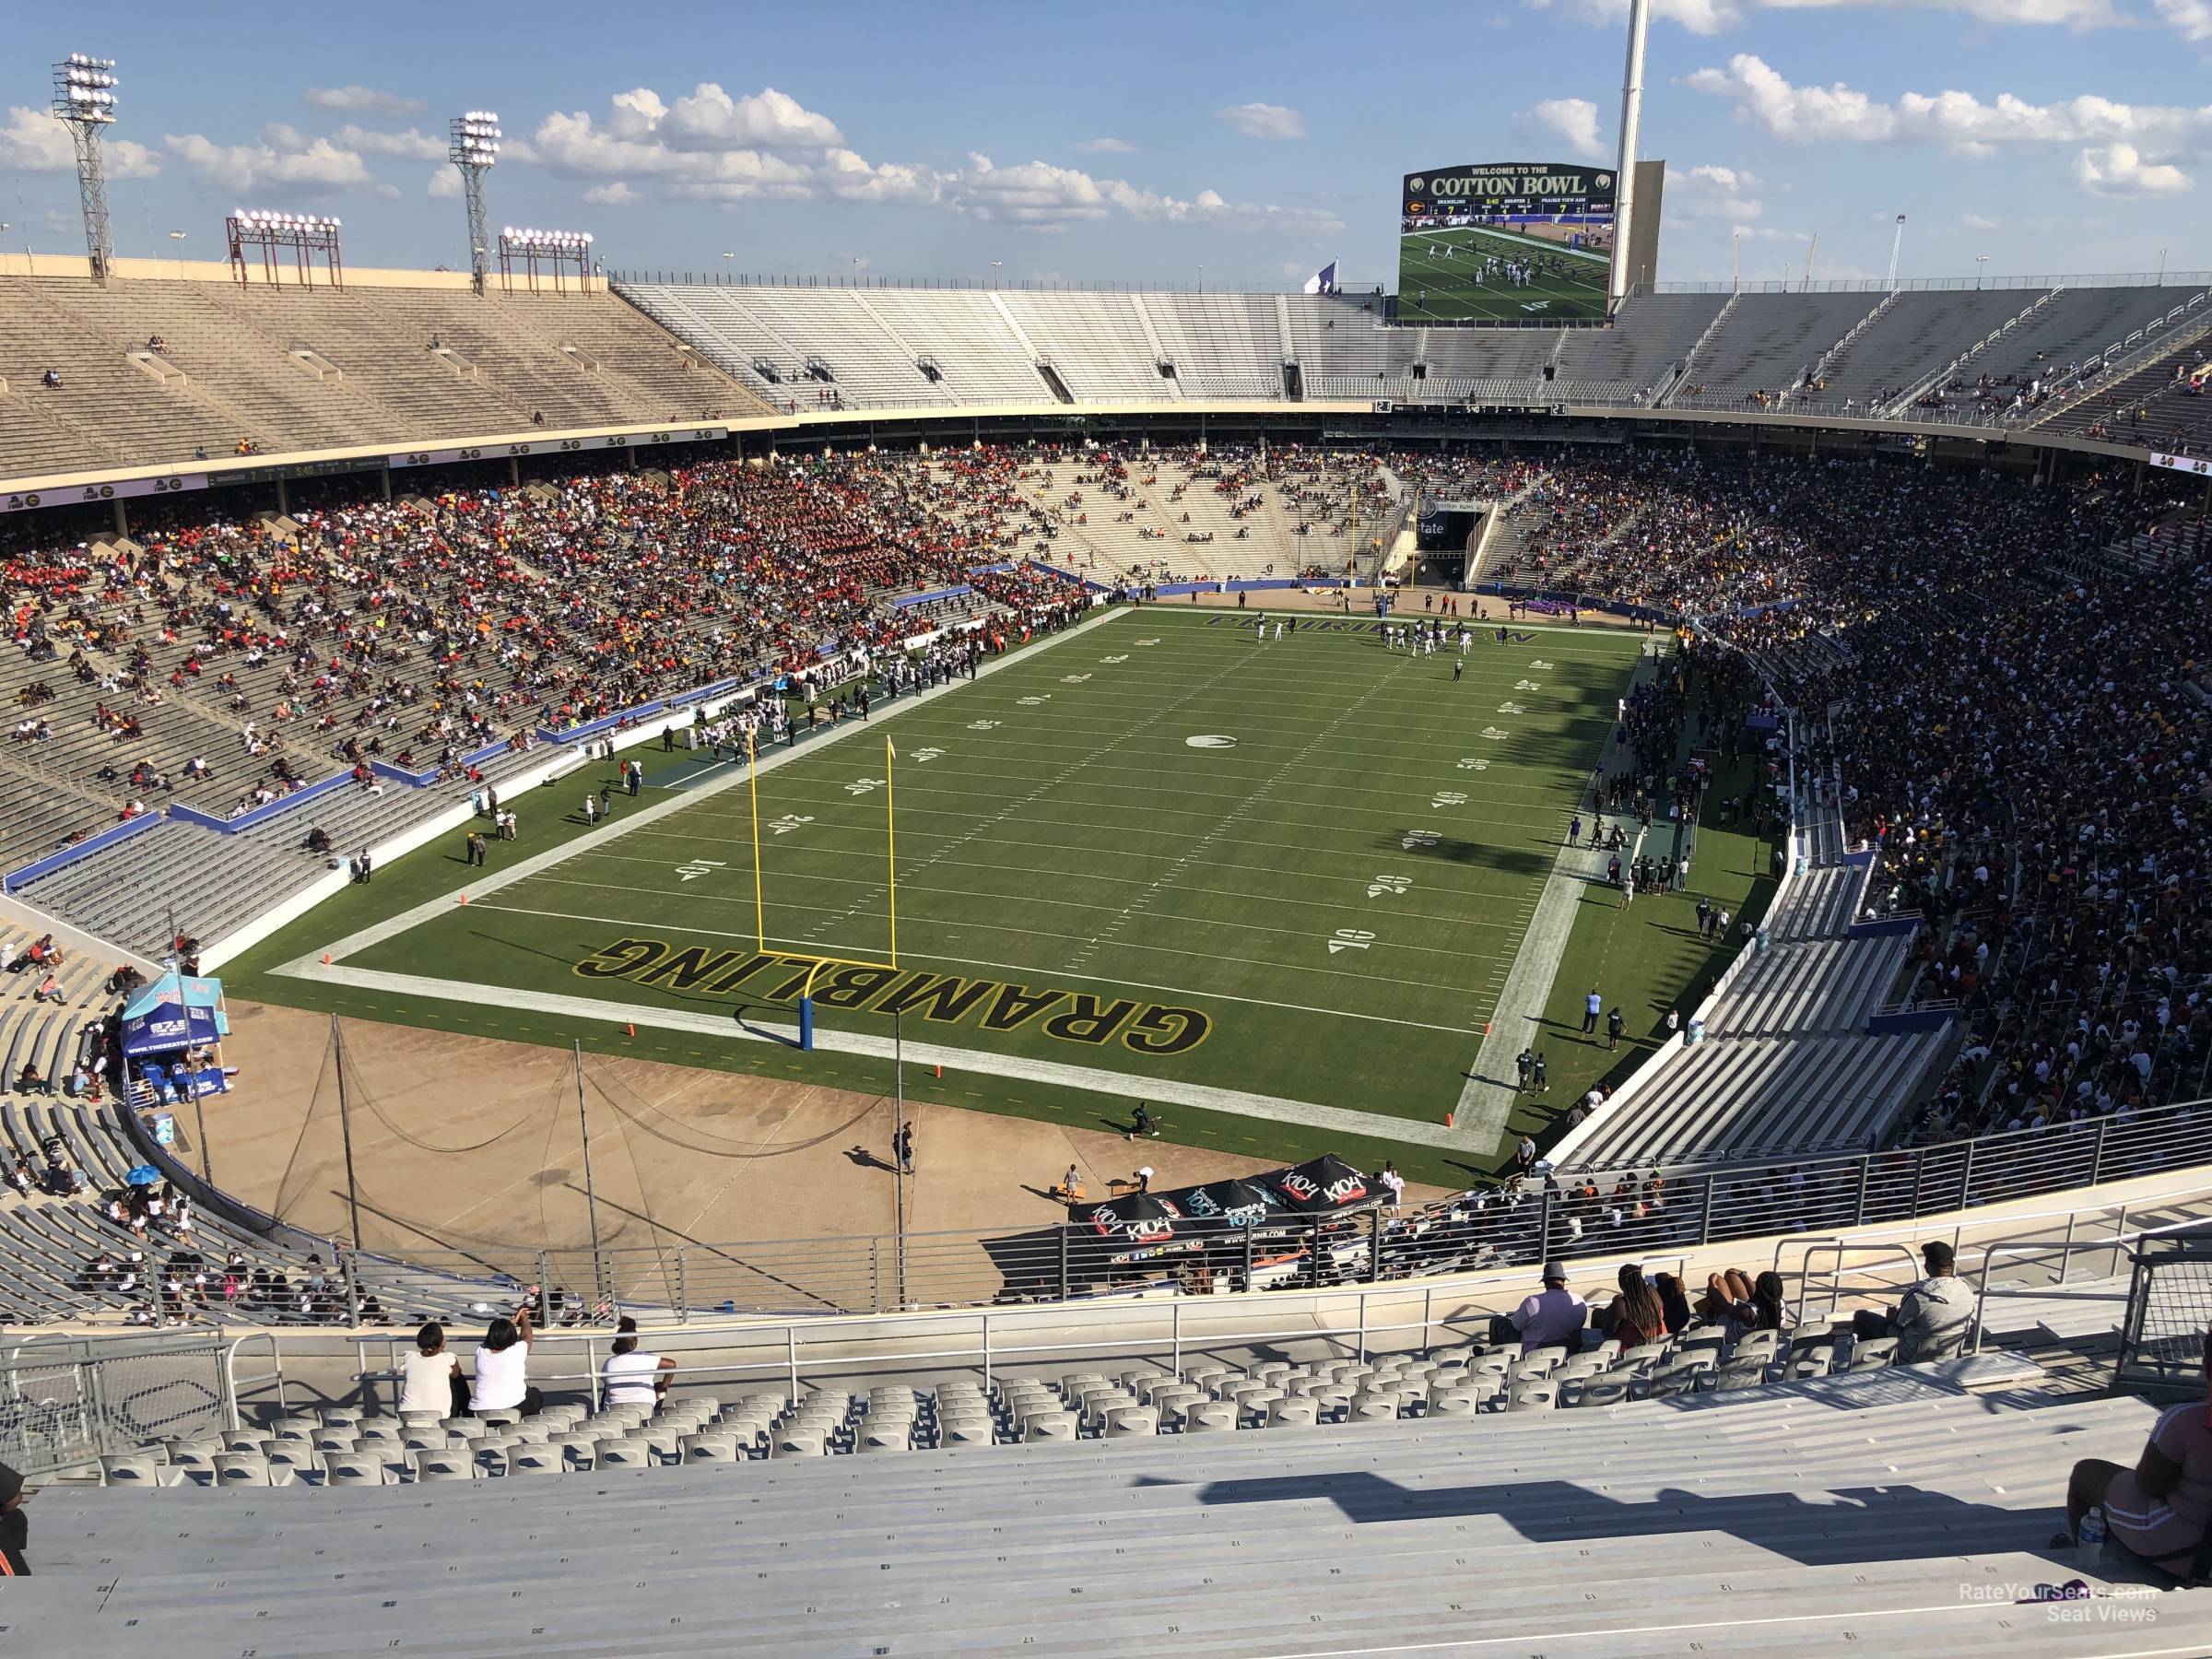 section 115, row 22 seat view  - cotton bowl